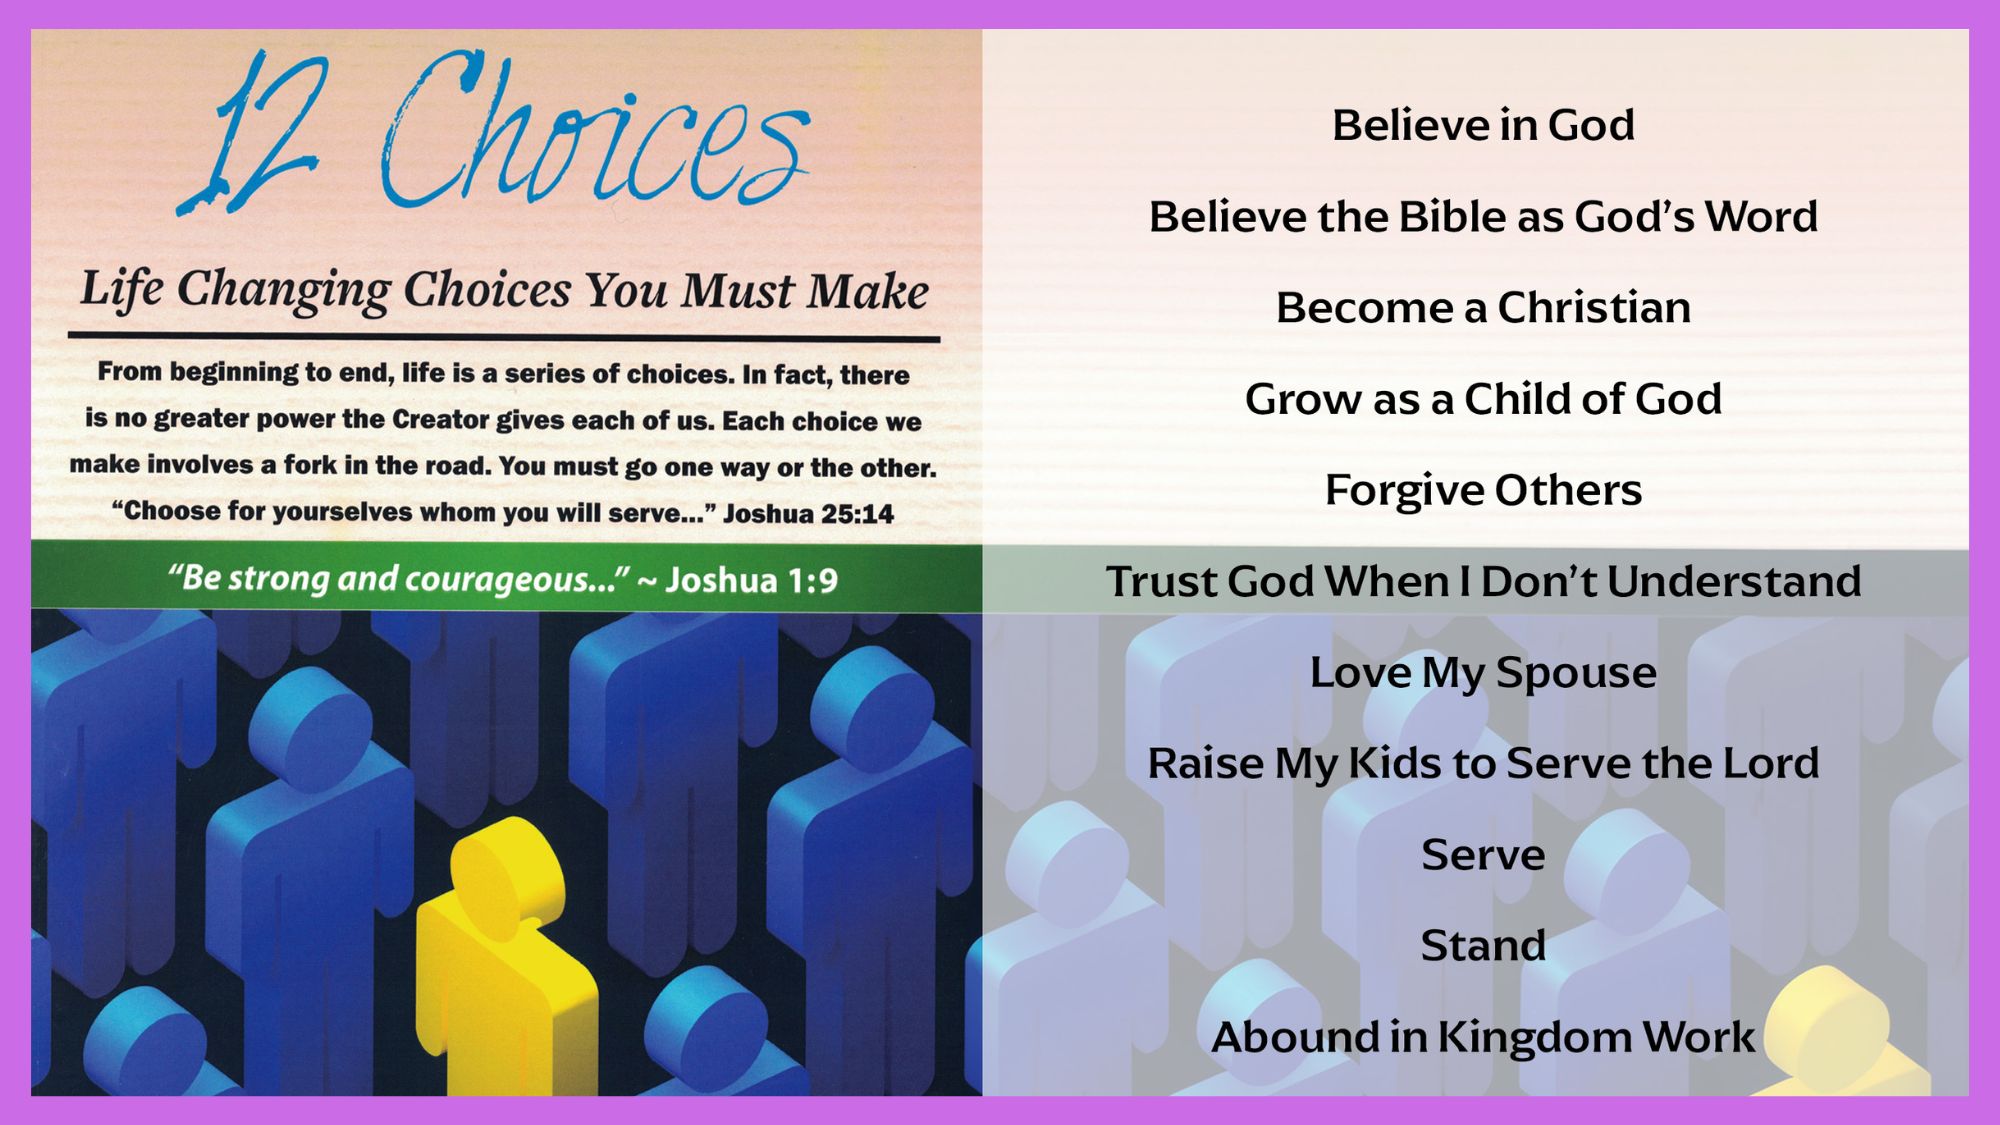 12 Choices - Life Changing Choices You Must Make Choice # 5 Forgive Others